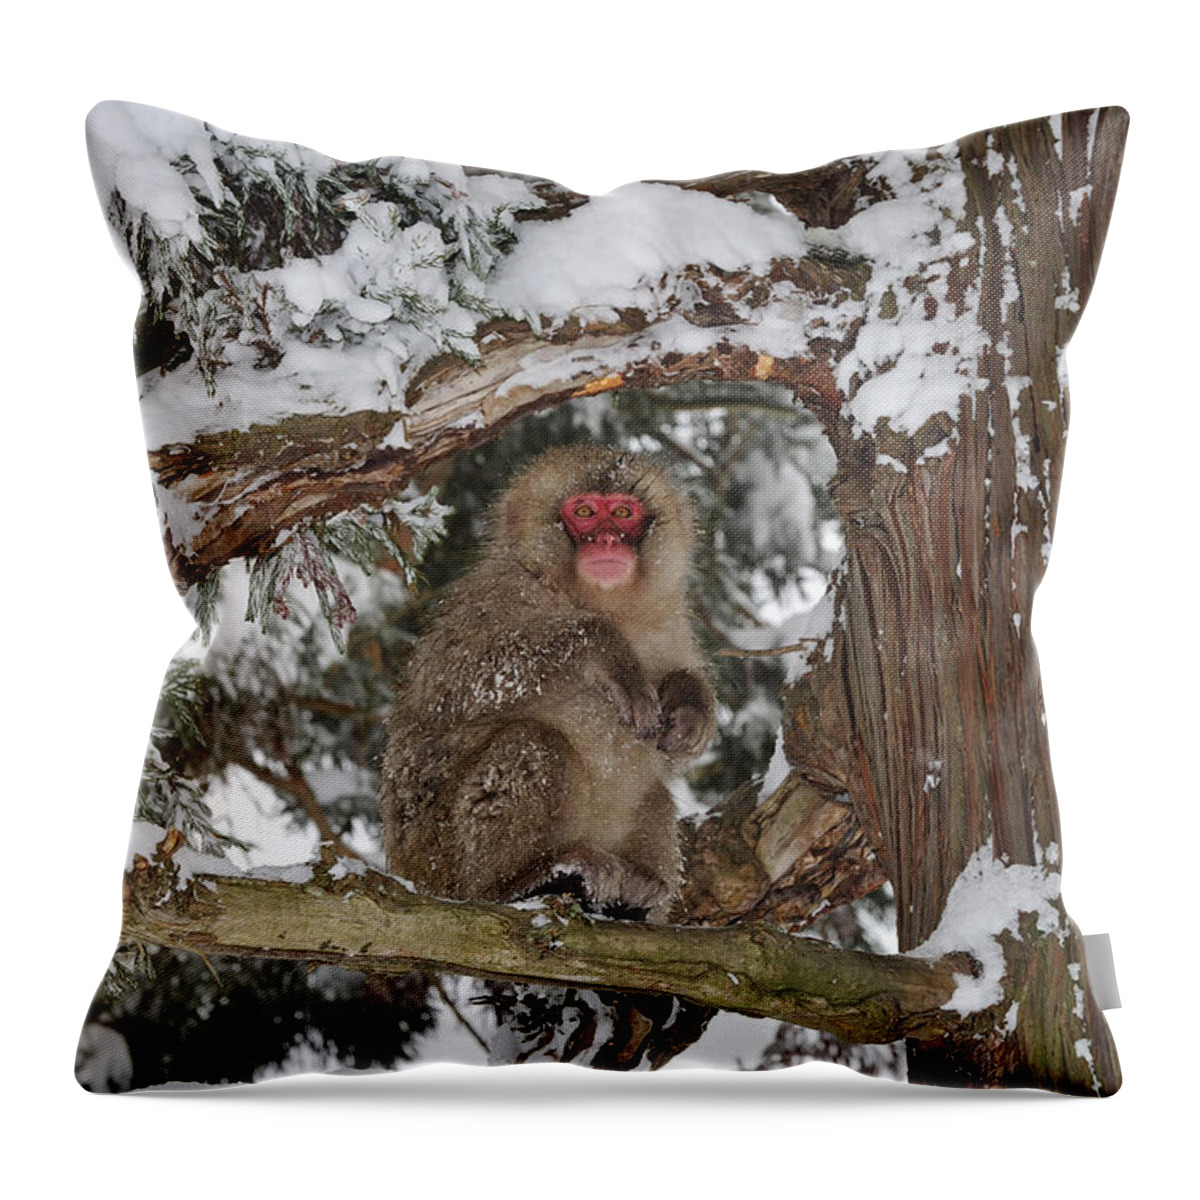 Thomas Marent Throw Pillow featuring the photograph Japanese Macaque In Tree Jigokudani by Thomas Marent